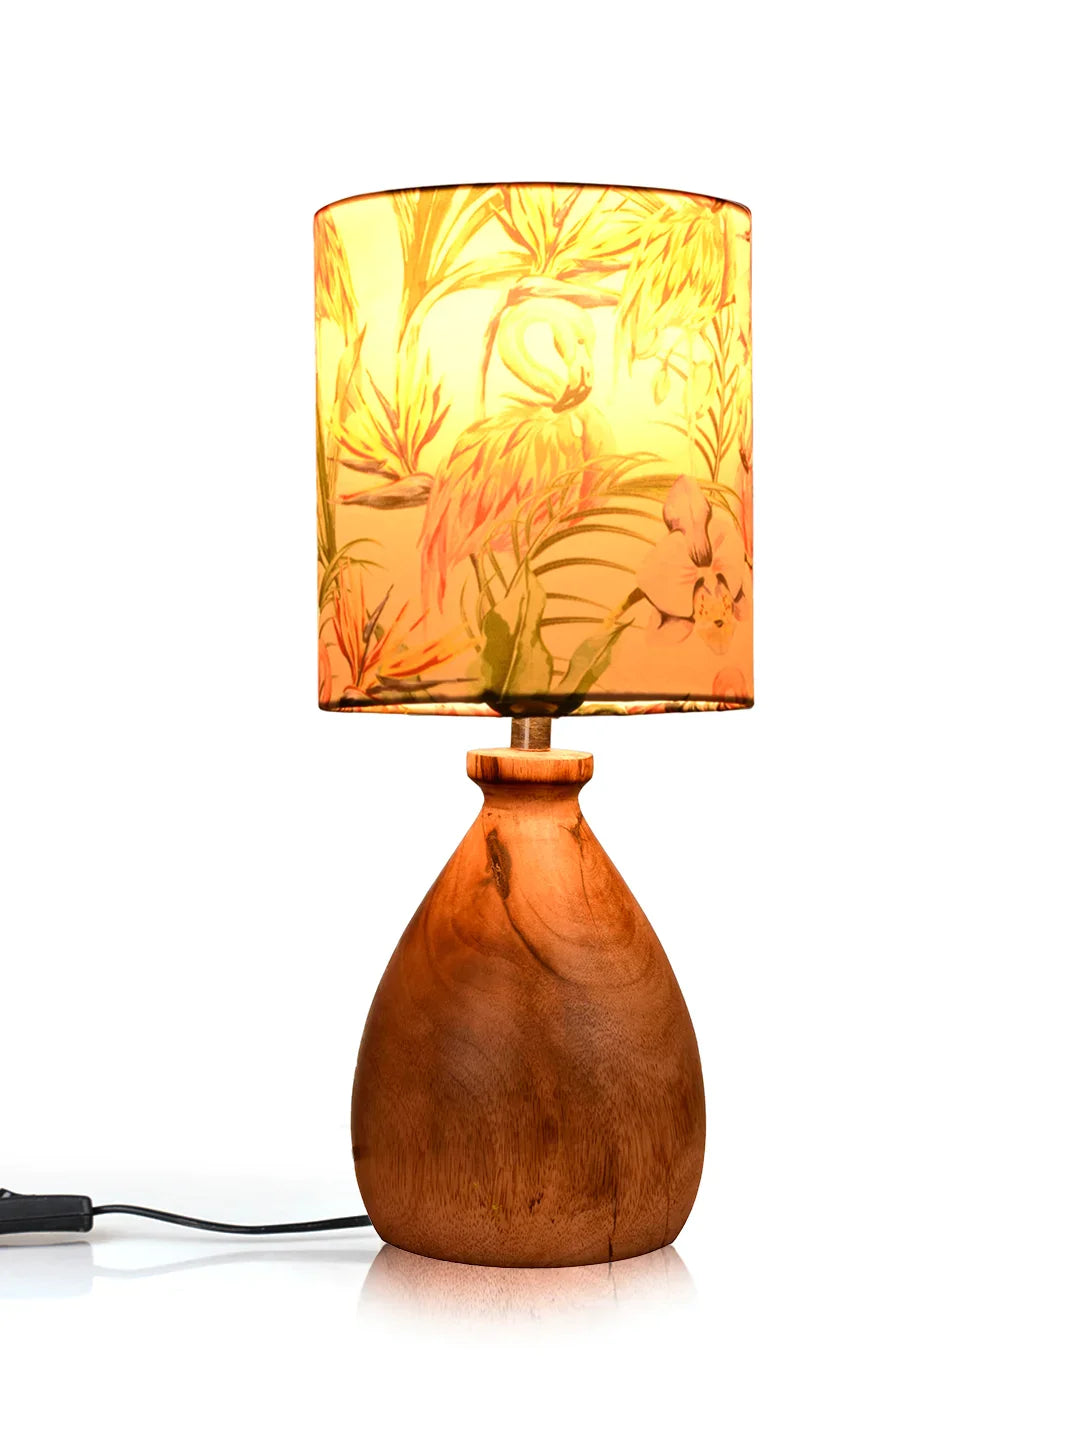 Wooden Dome Table Lamp with Multicolor Pink Flamingo Lamp Shade